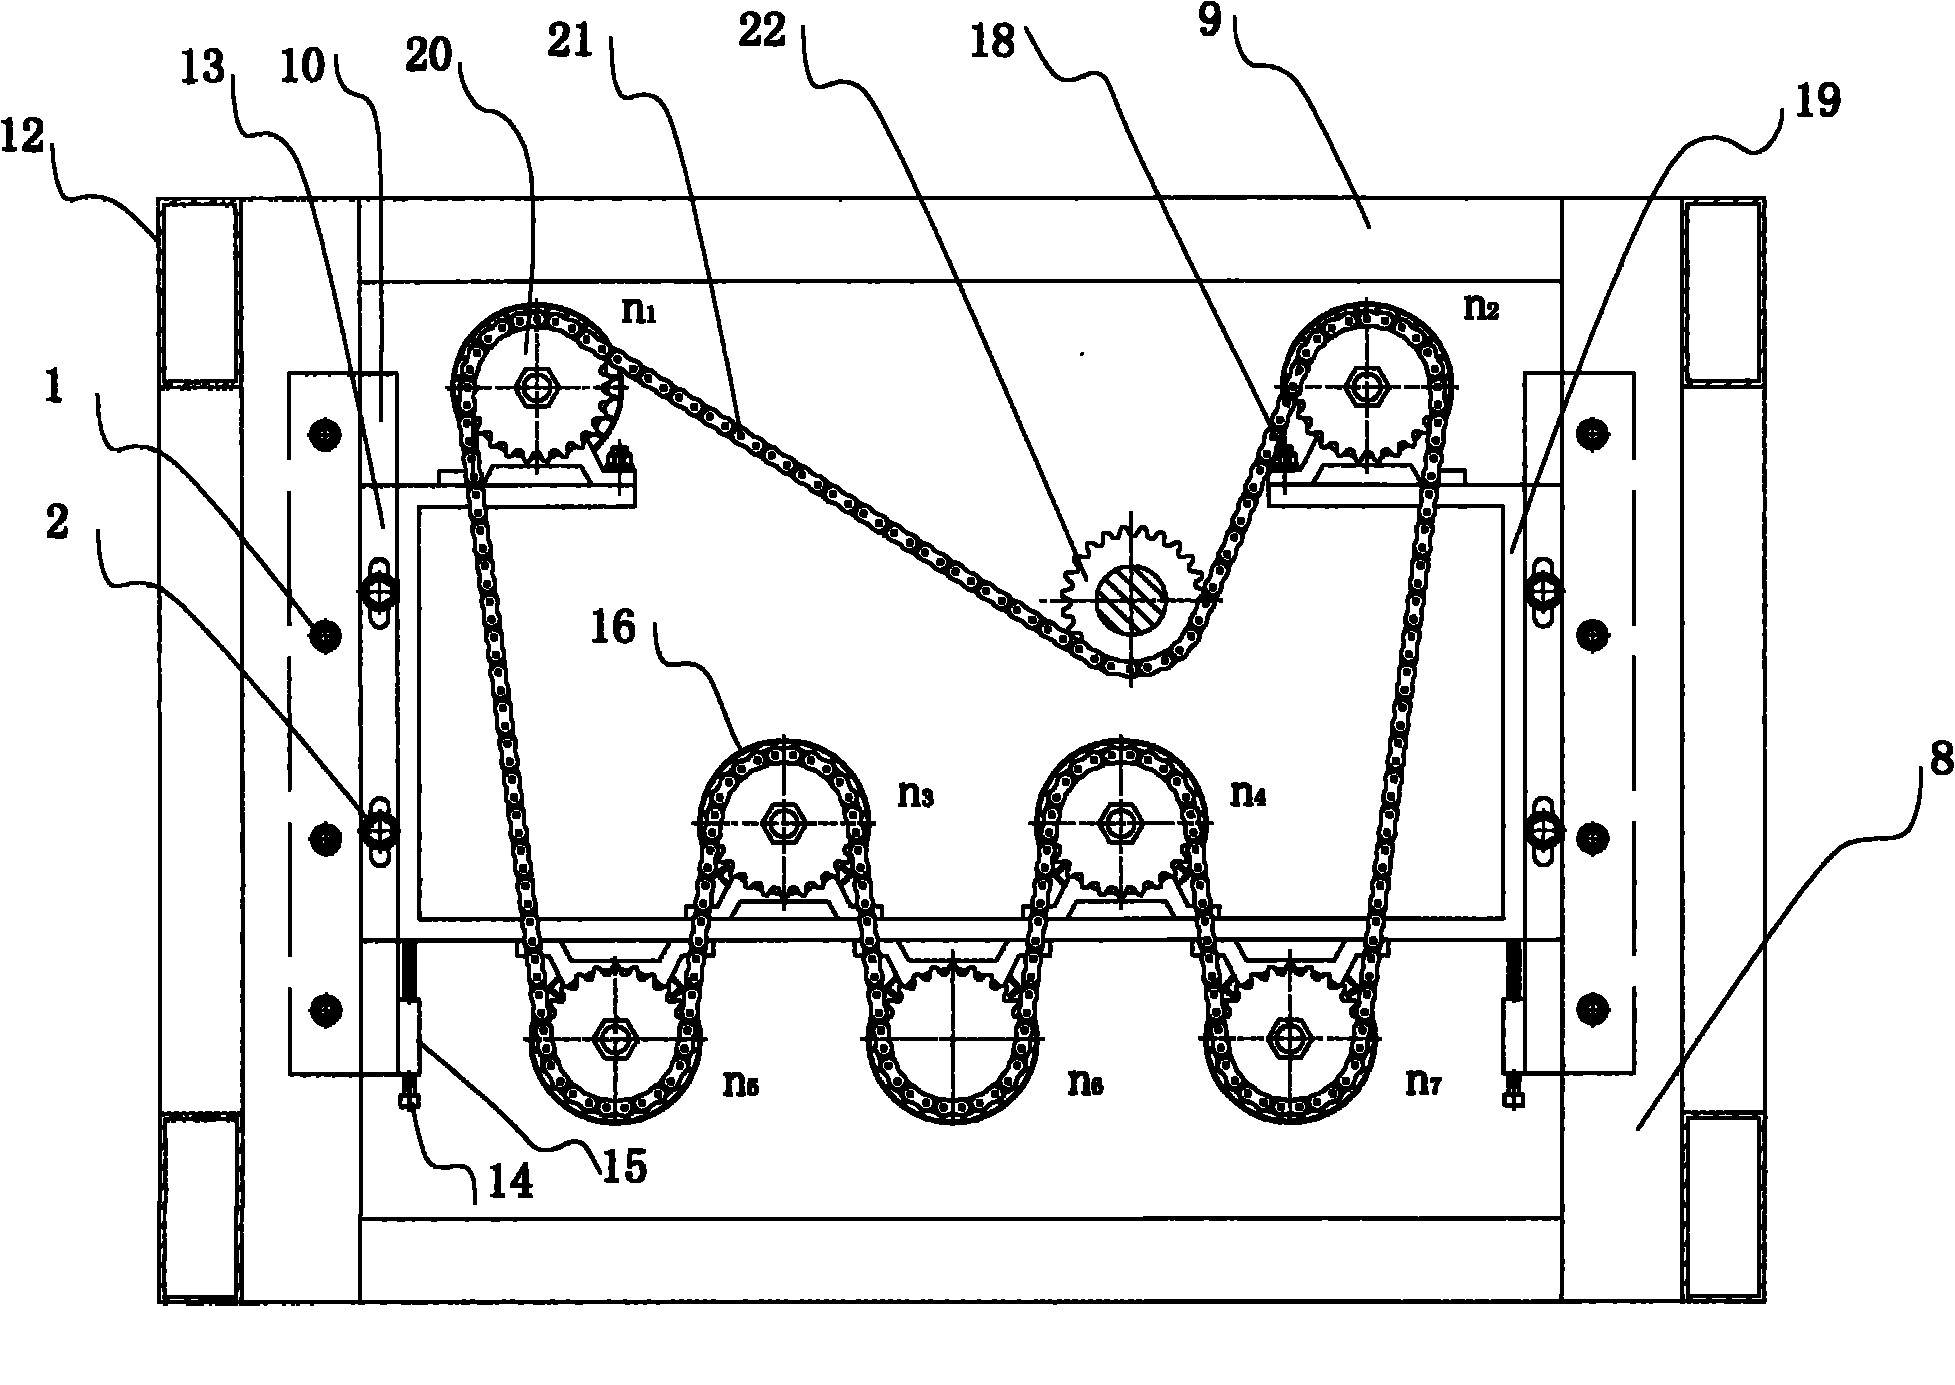 Fabrication scheme for voltage-stabilized current-regulated wind turbine generator system